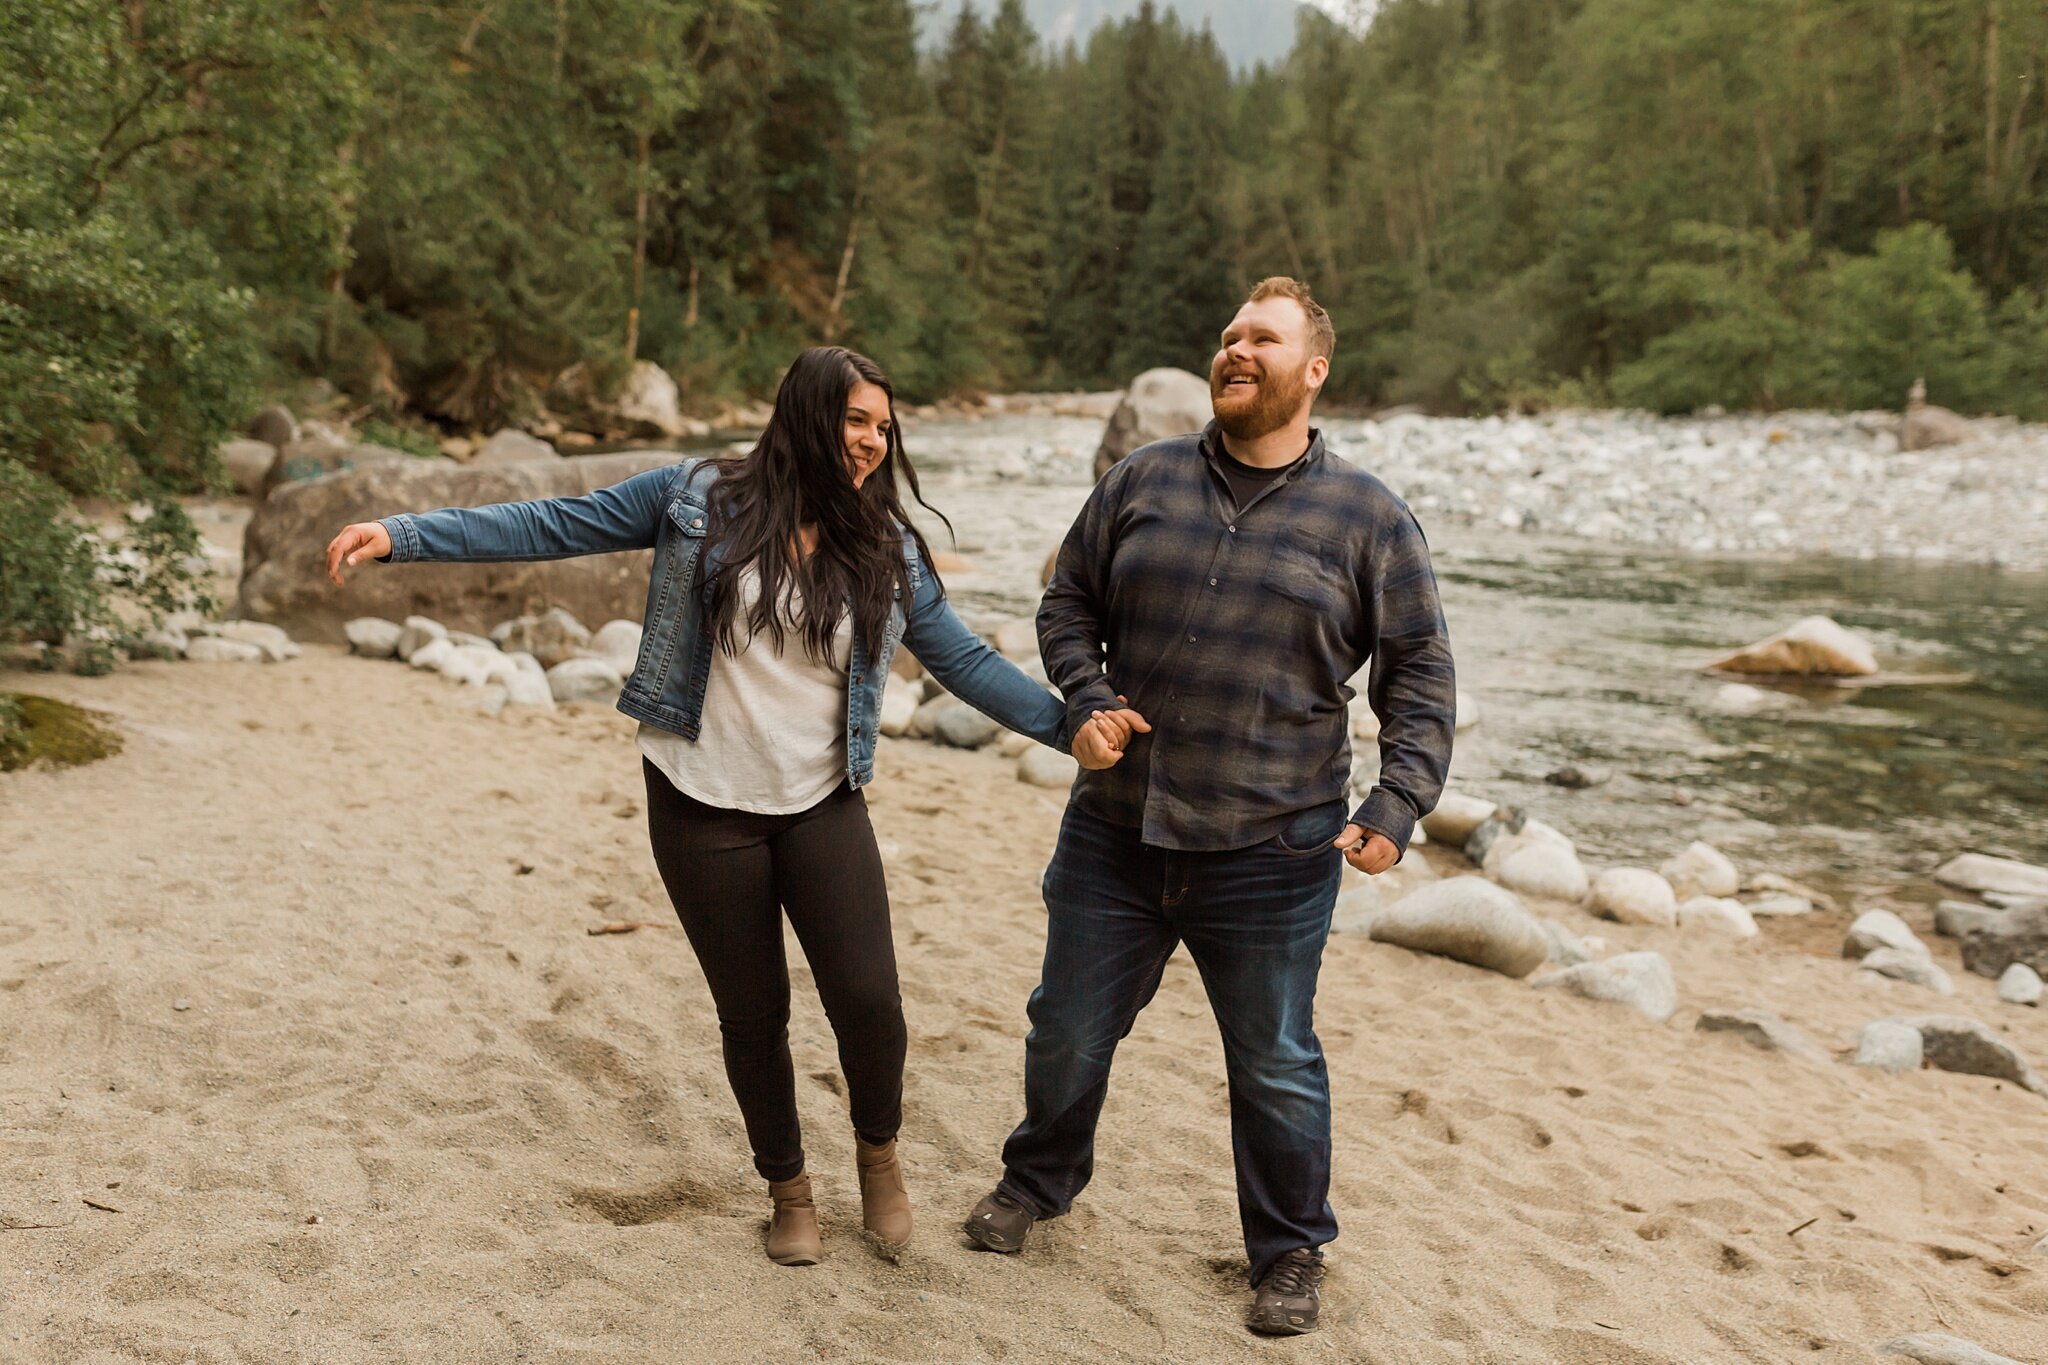 book your engagement session at Golden ears park today!